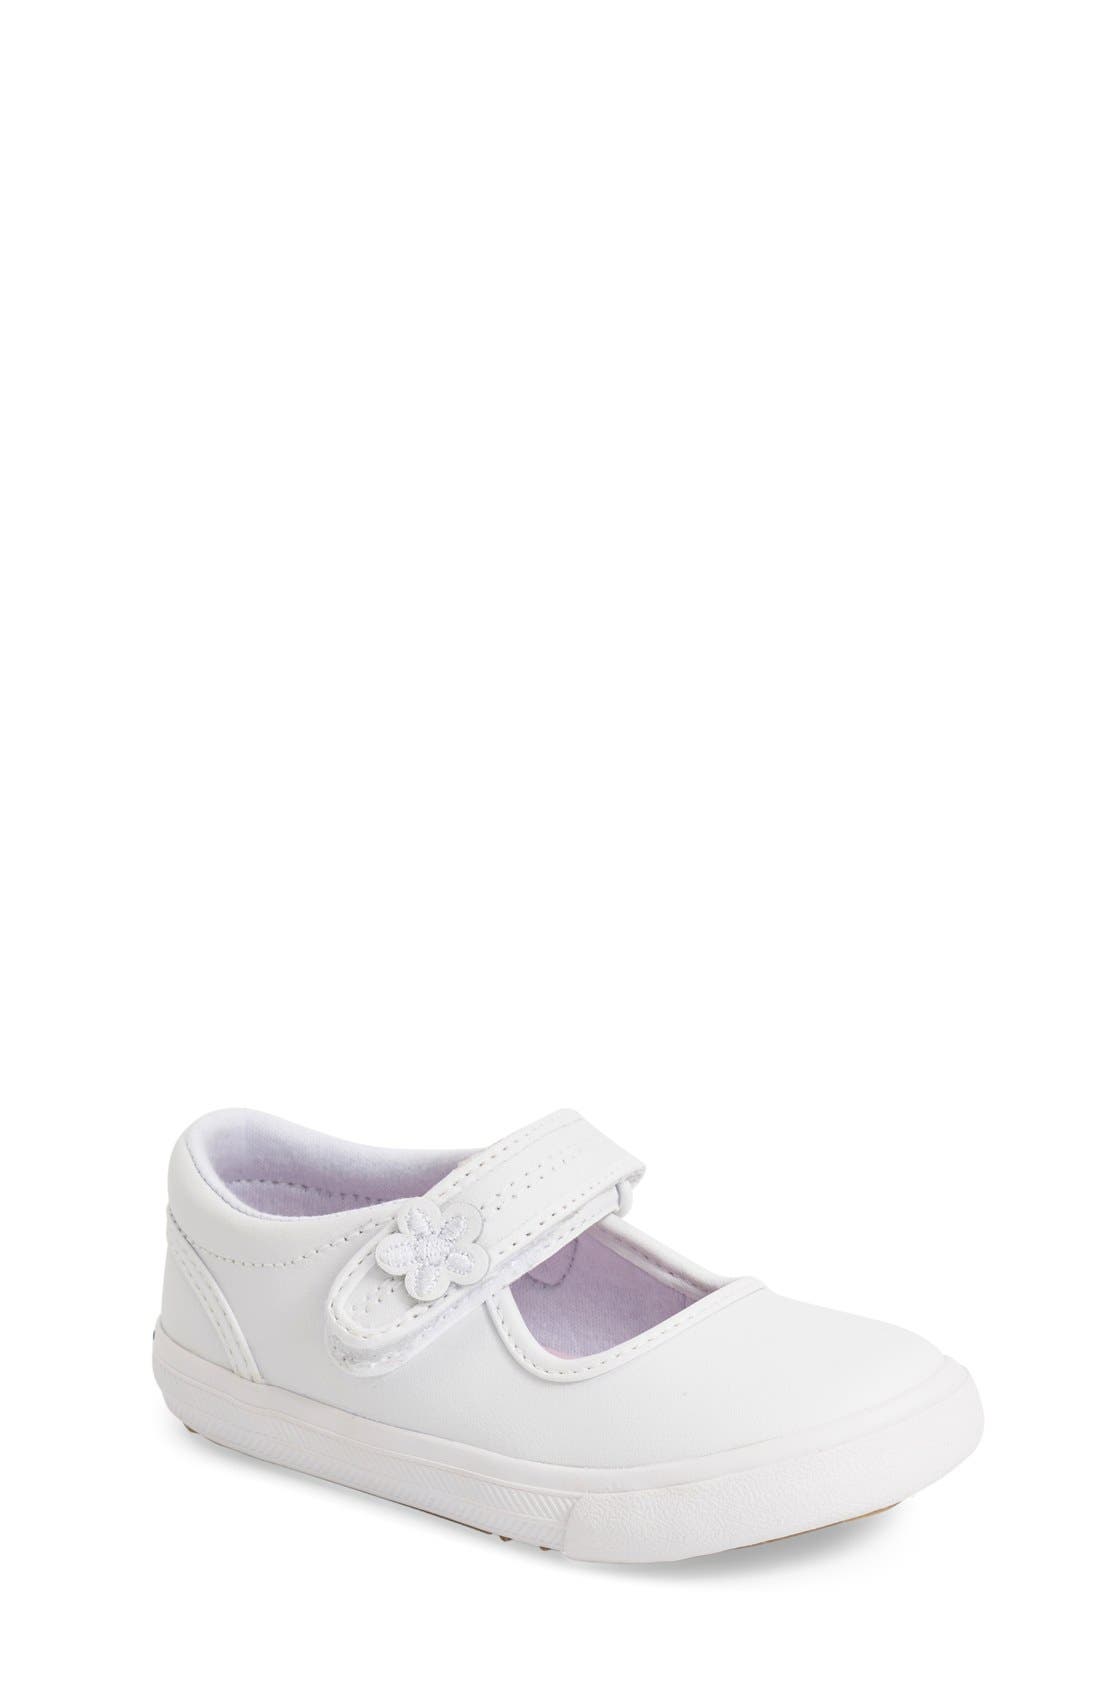 keds shoes for toddlers